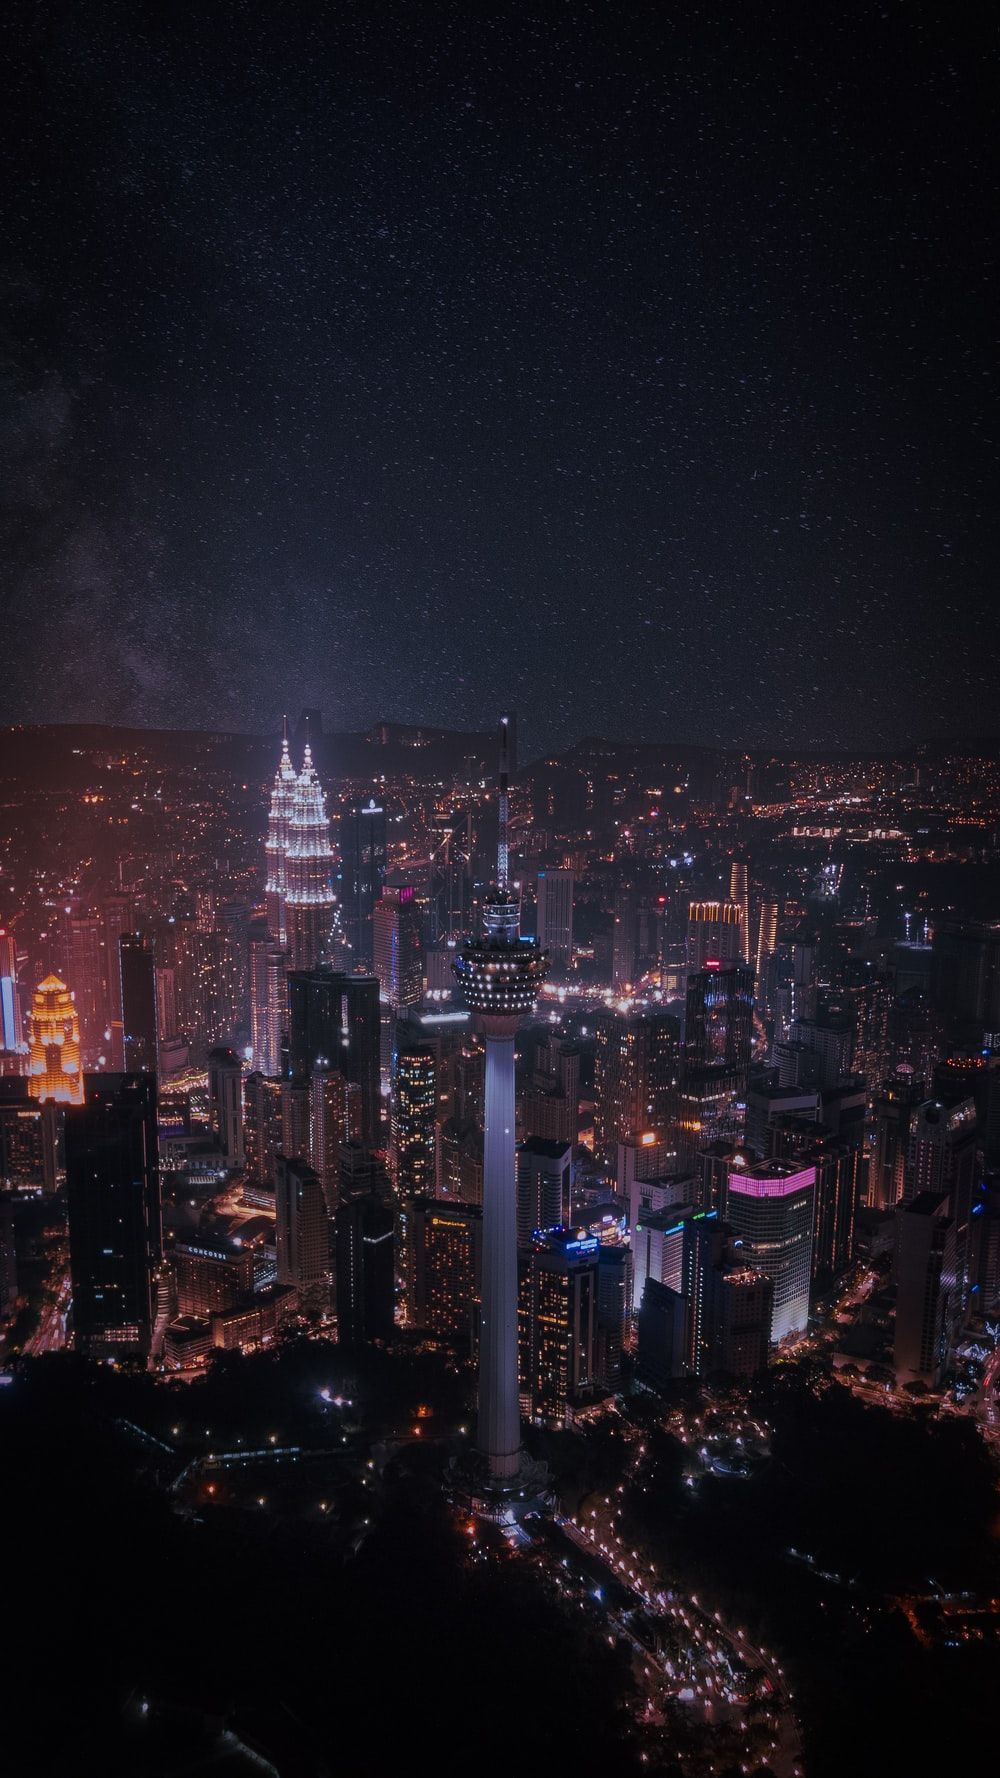 City Night Sky Picture. Download Free Image